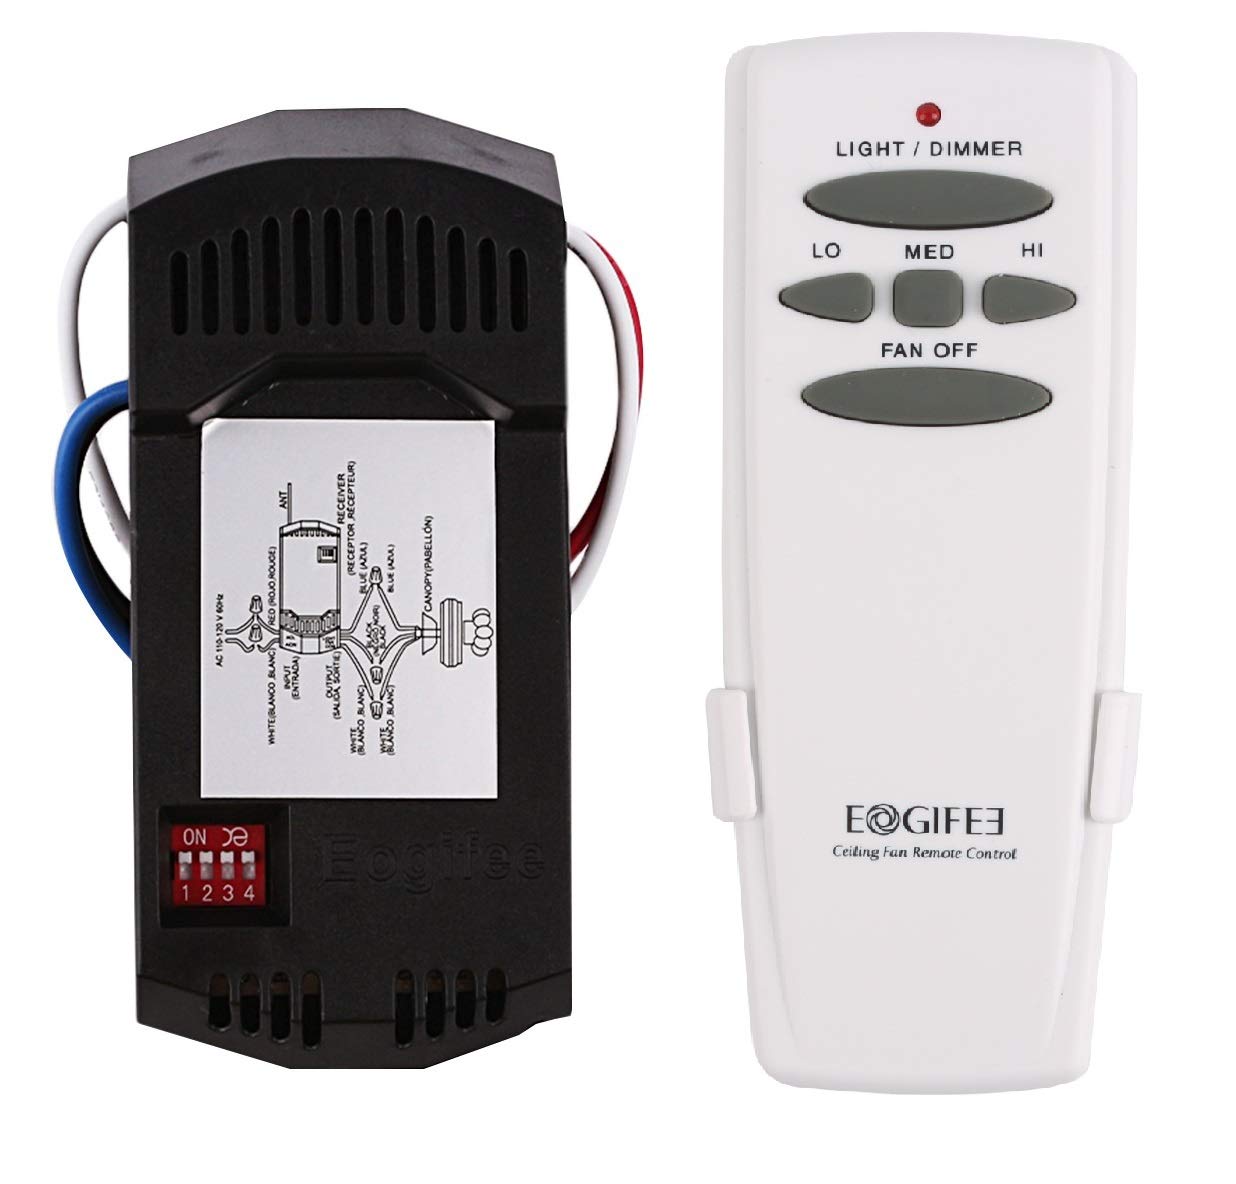 Eogifee Universal Ceiling Fan Remote Control and Receiver Kit Replacement of Hampton Bay Harbor Breeze Hunter HD5 Kit ASIN:B07H6Z6PXB  UPC:747880851376